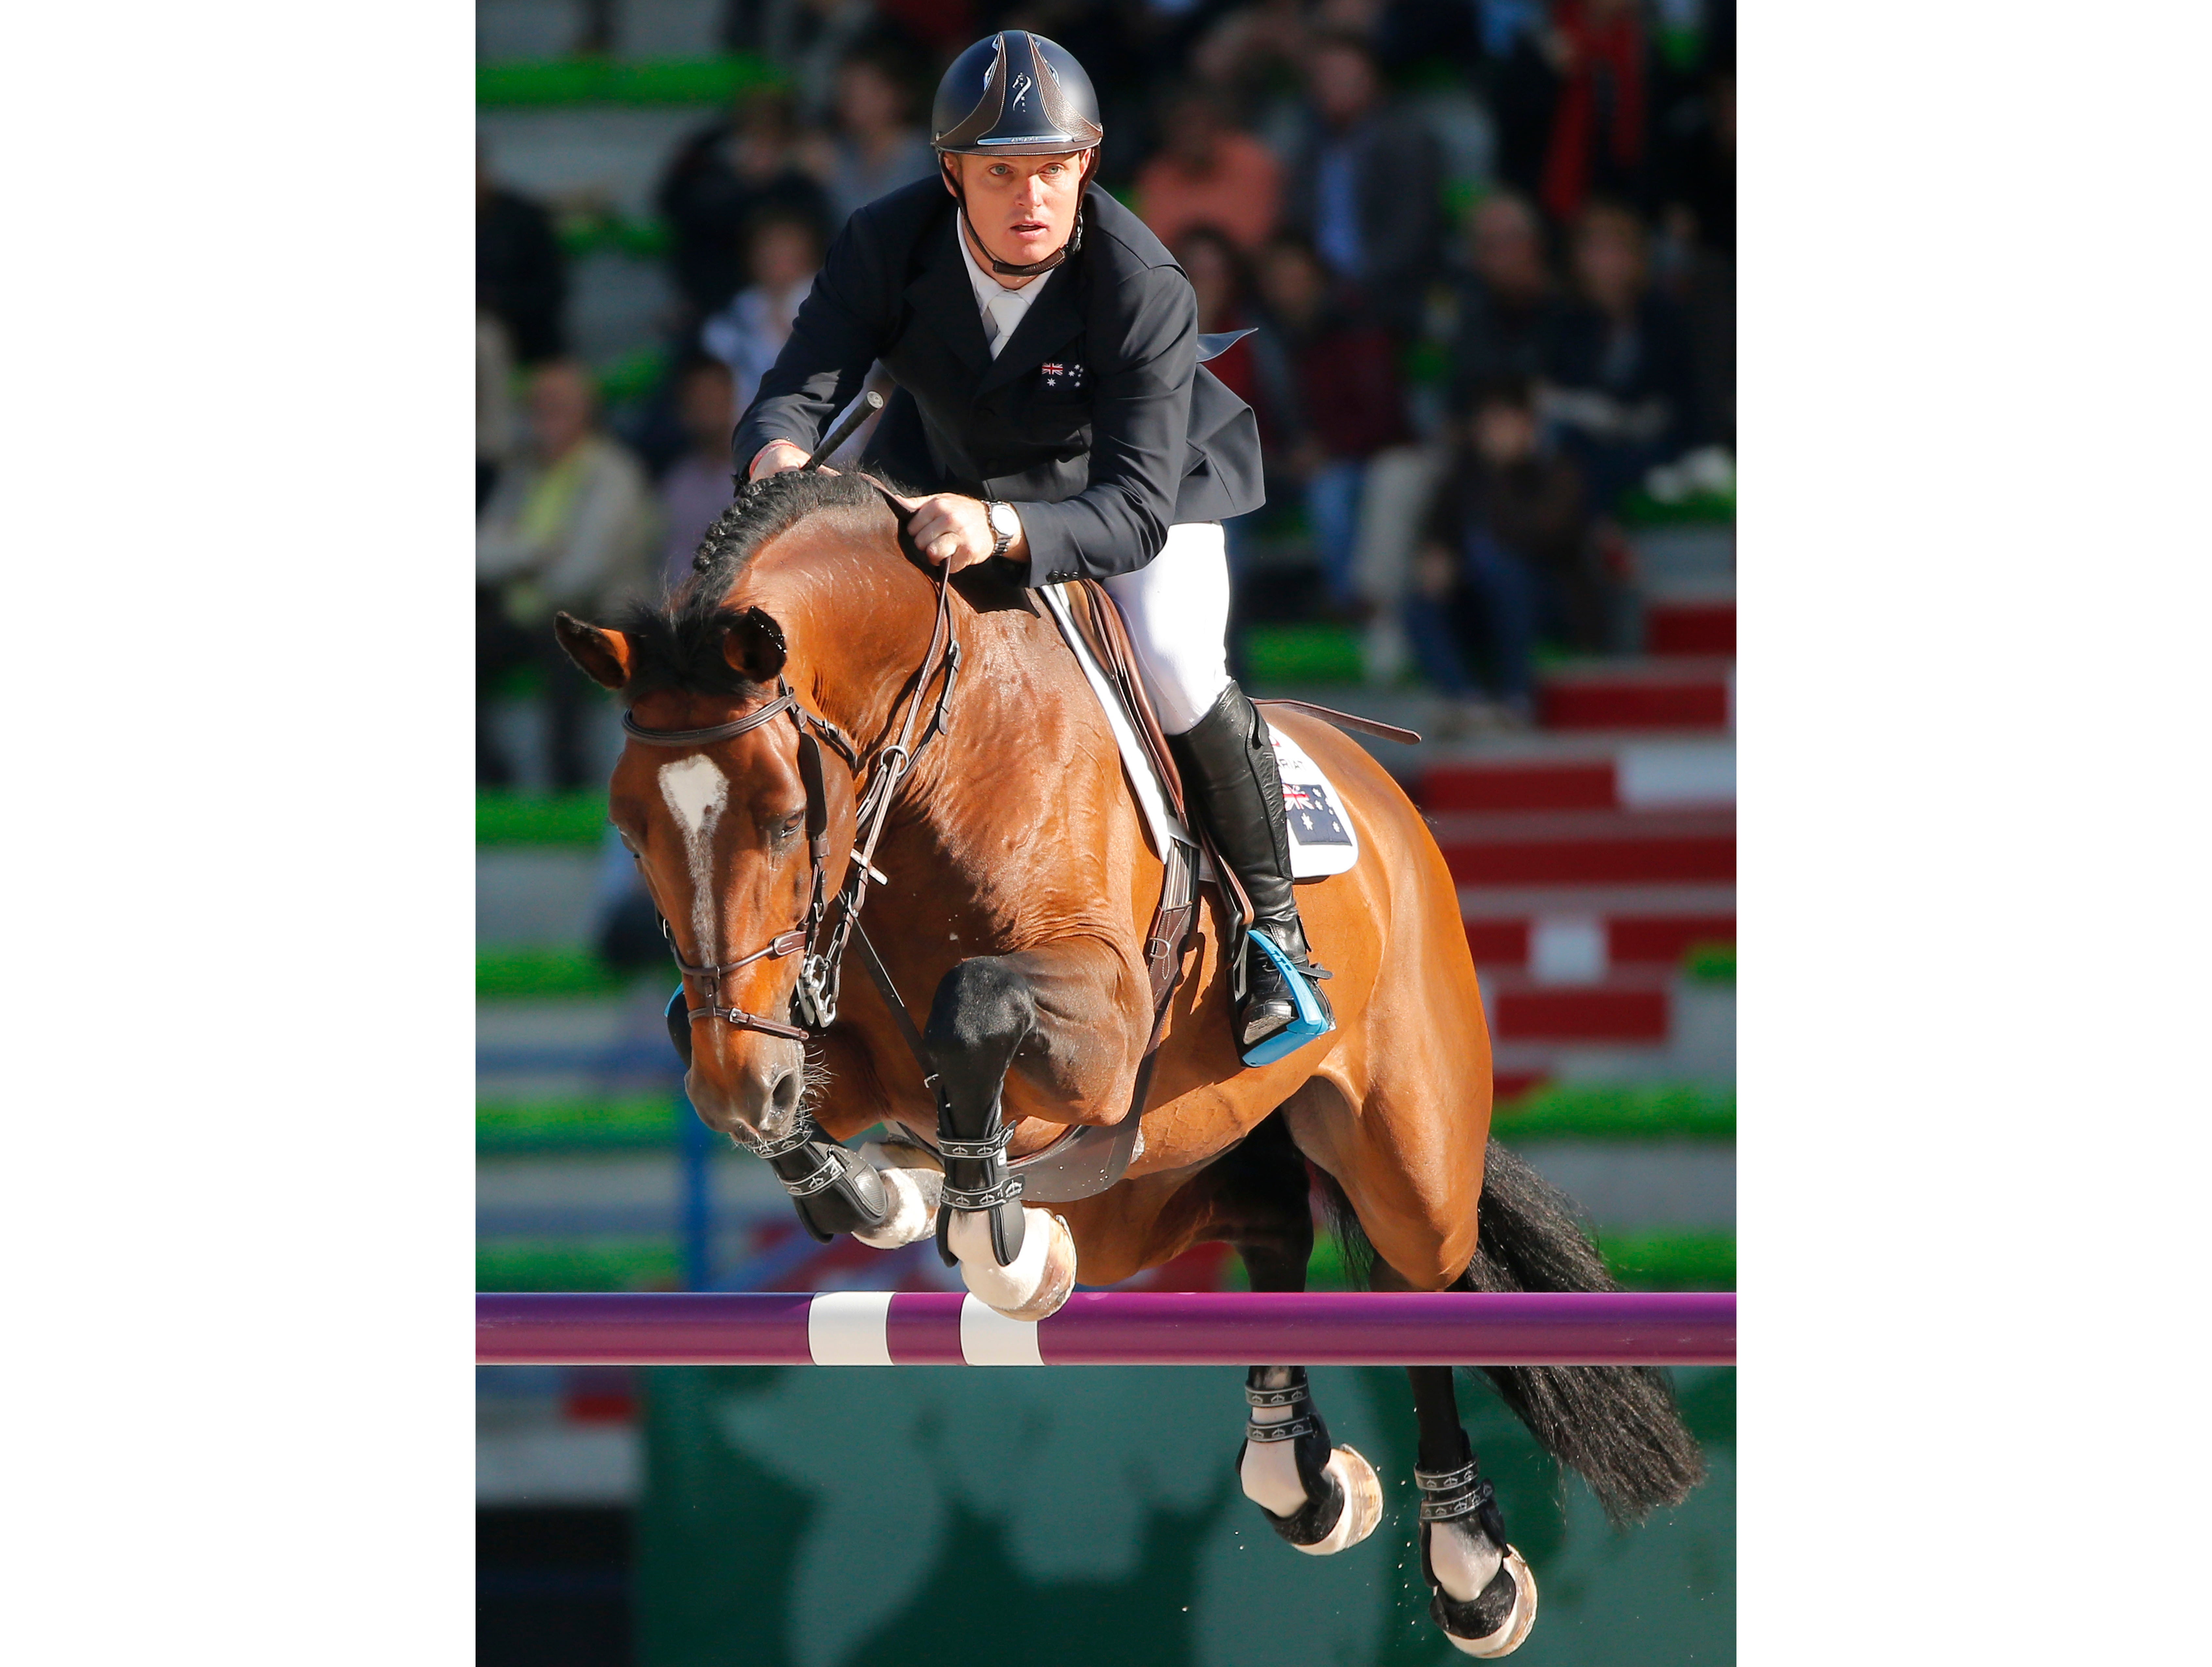 File: In this 2014 image, Jamie Kermond of Australia competes at the FEI World Equestrian Games in Caen